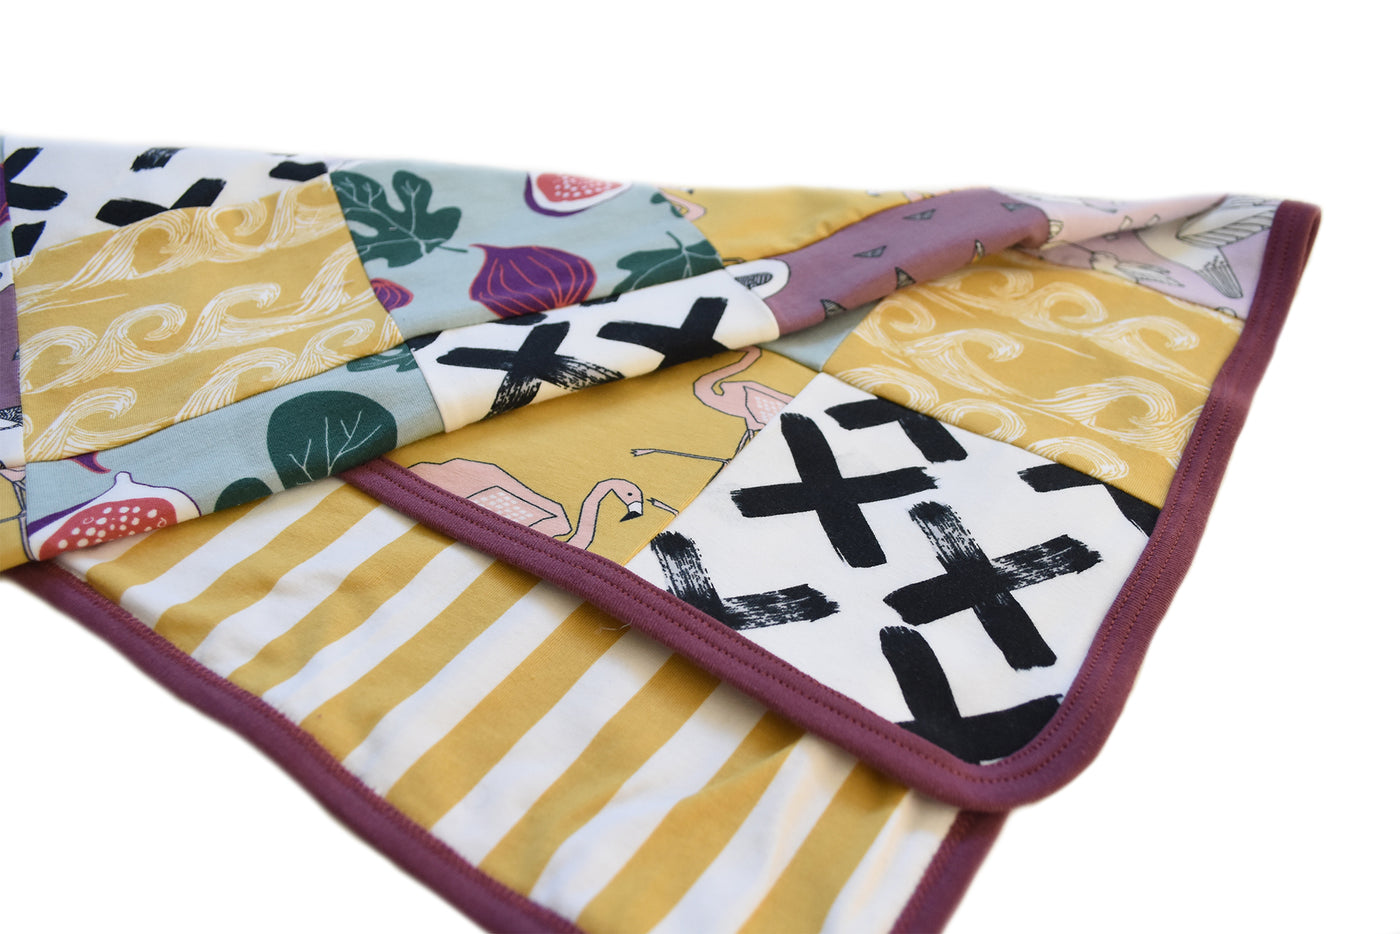 How to sew a patchwork blanket or baby blanket